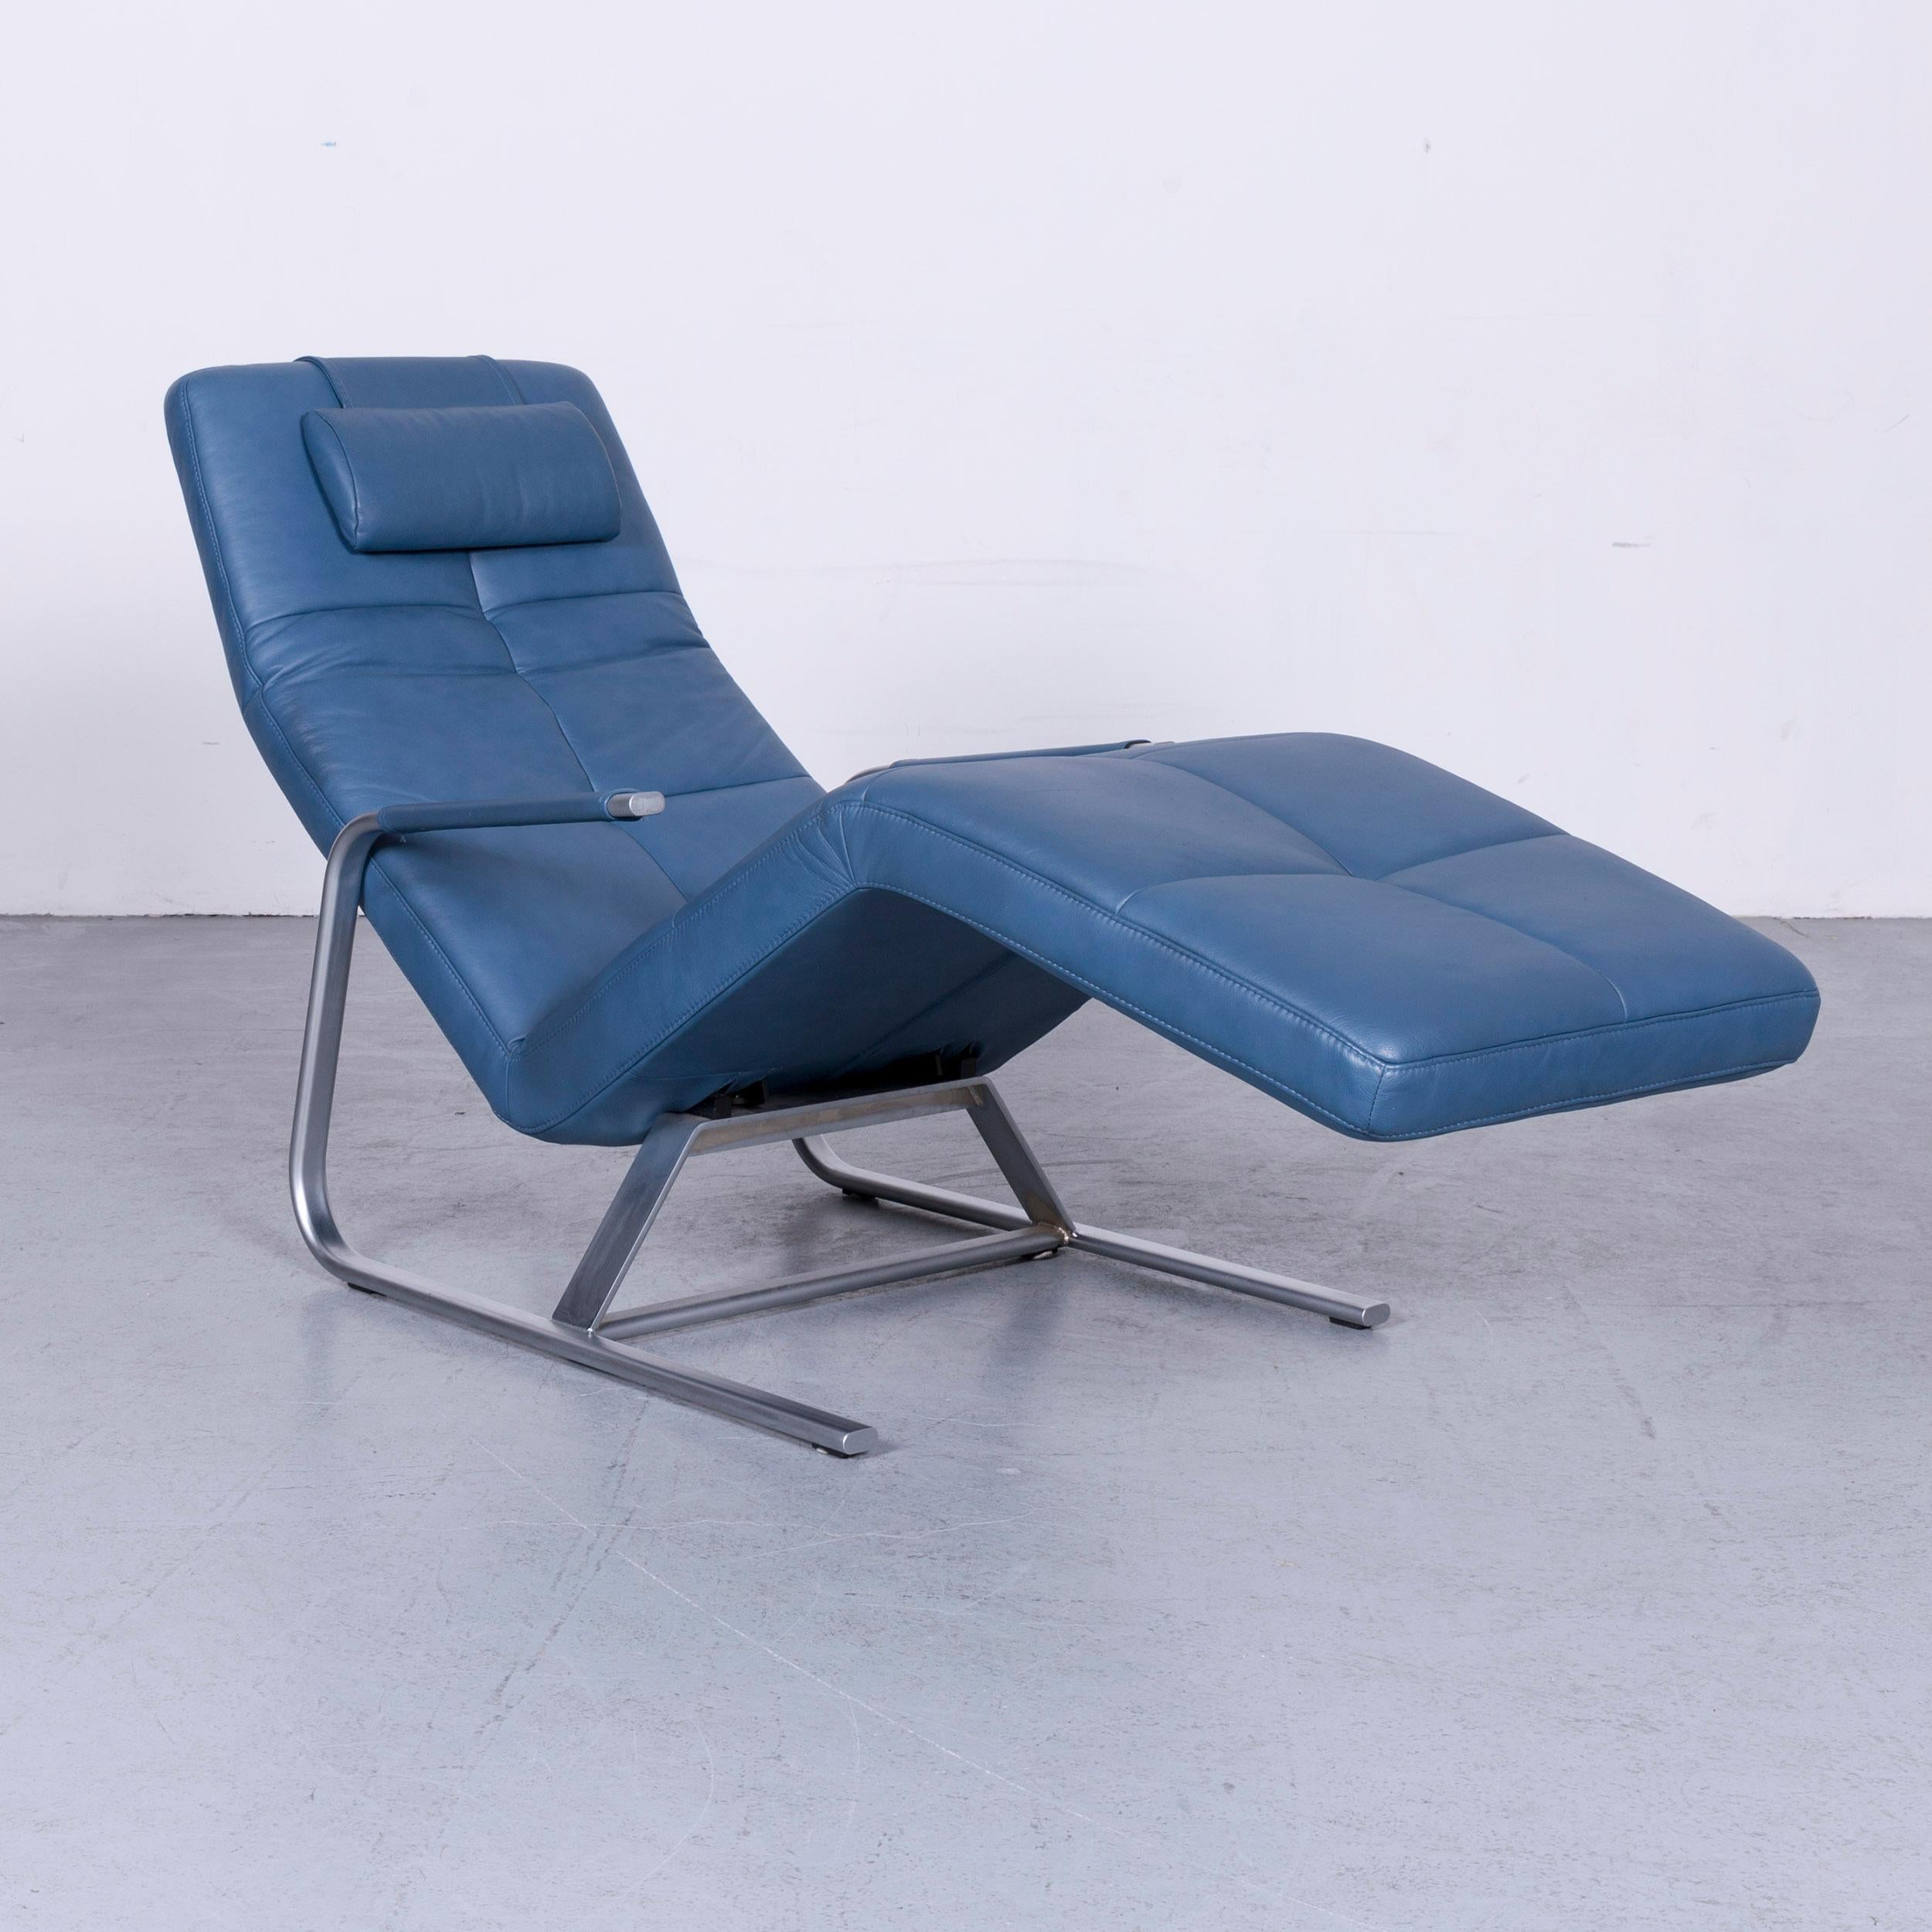 We bring to you an Ewald Schillig Vita designer couch leather blue one-seat function modern.